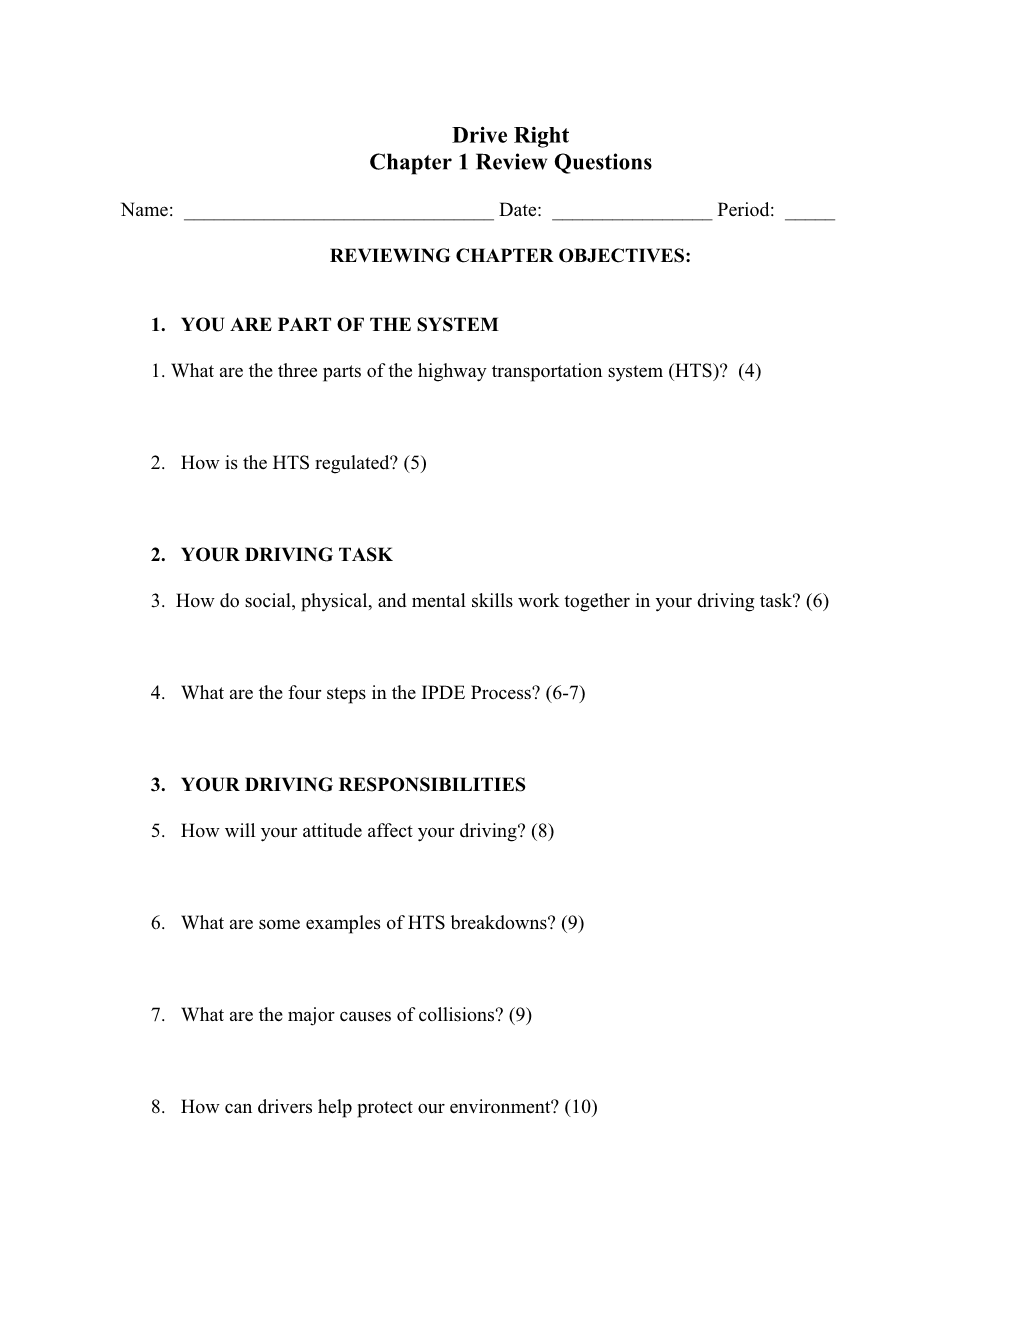 Chapter 1 Review Questions